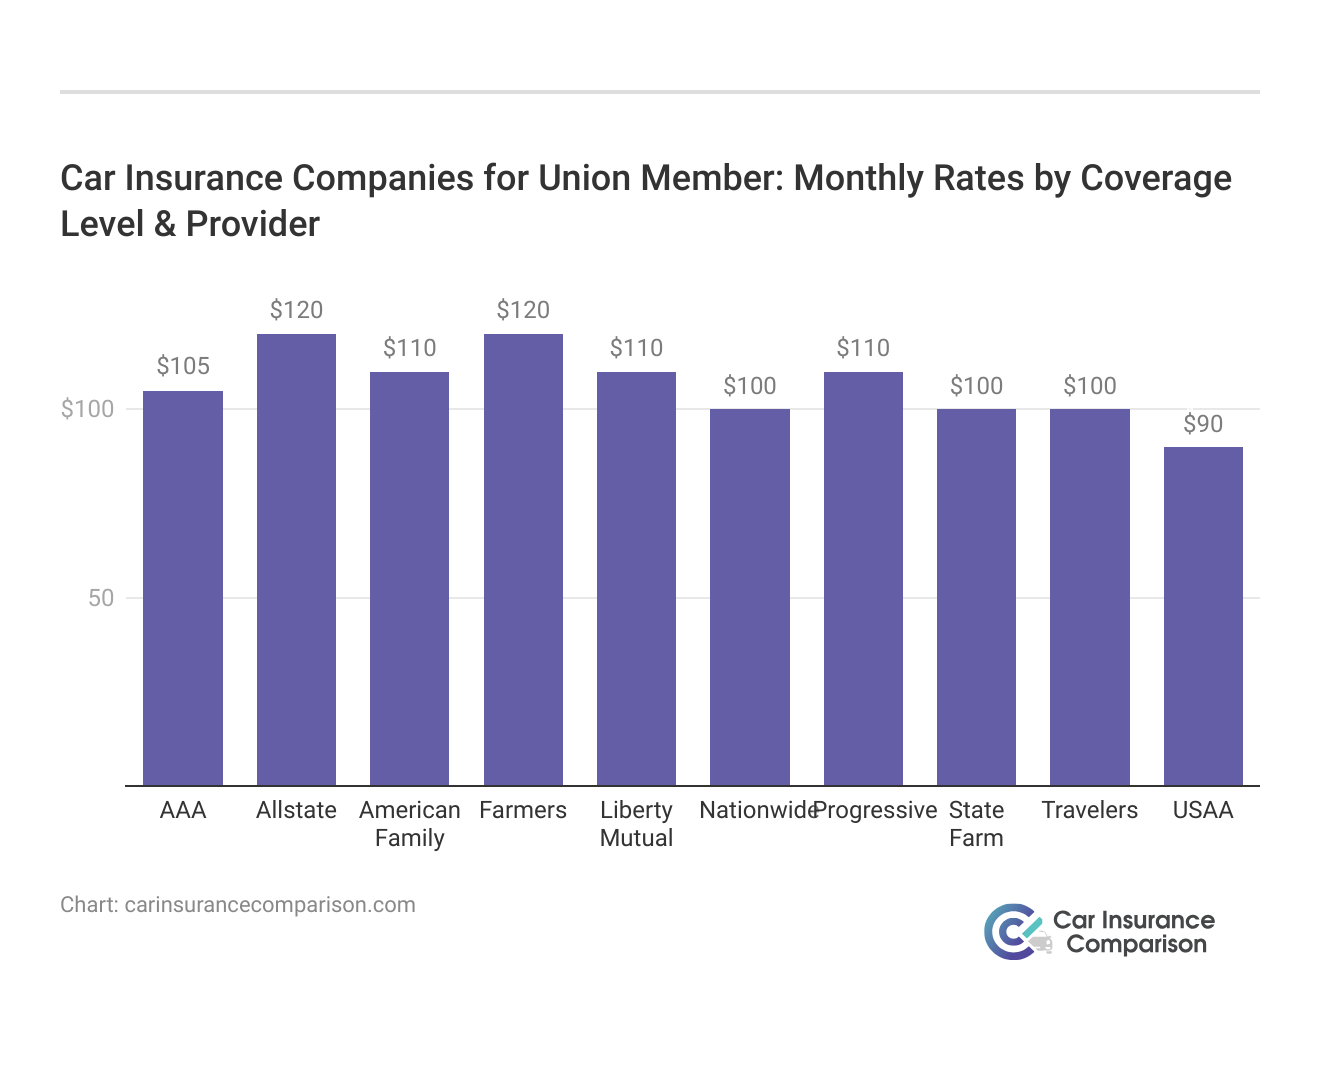 <h3>Car Insurance Companies for Union Member: Monthly Rates by Coverage Level & Provider</h3>